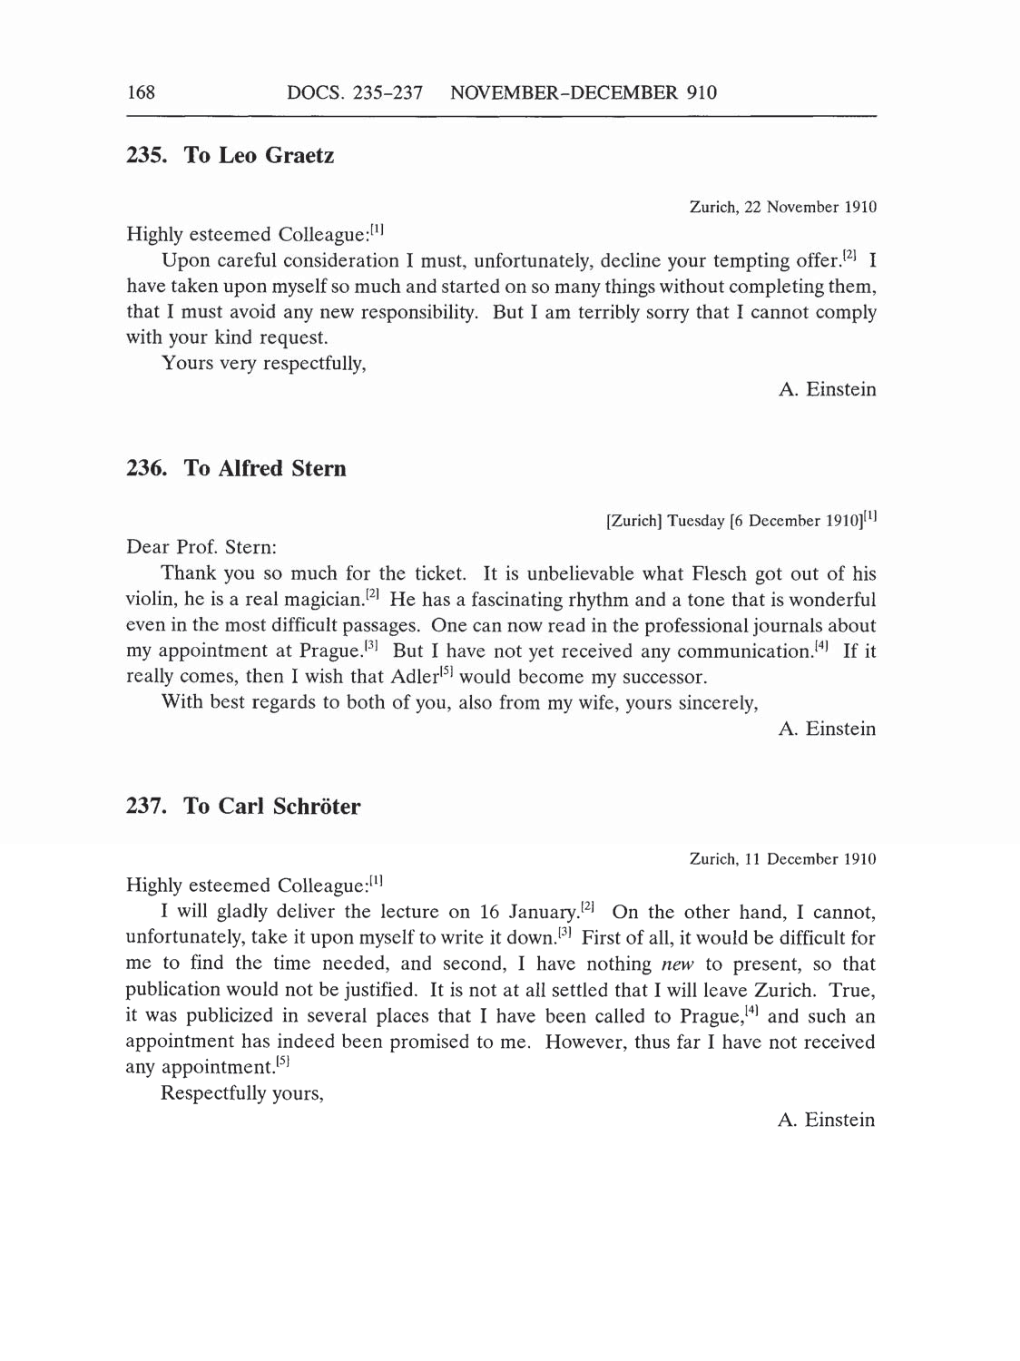 Volume 5: The Swiss Years: Correspondence, 1902-1914 (English translation supplement) page 168